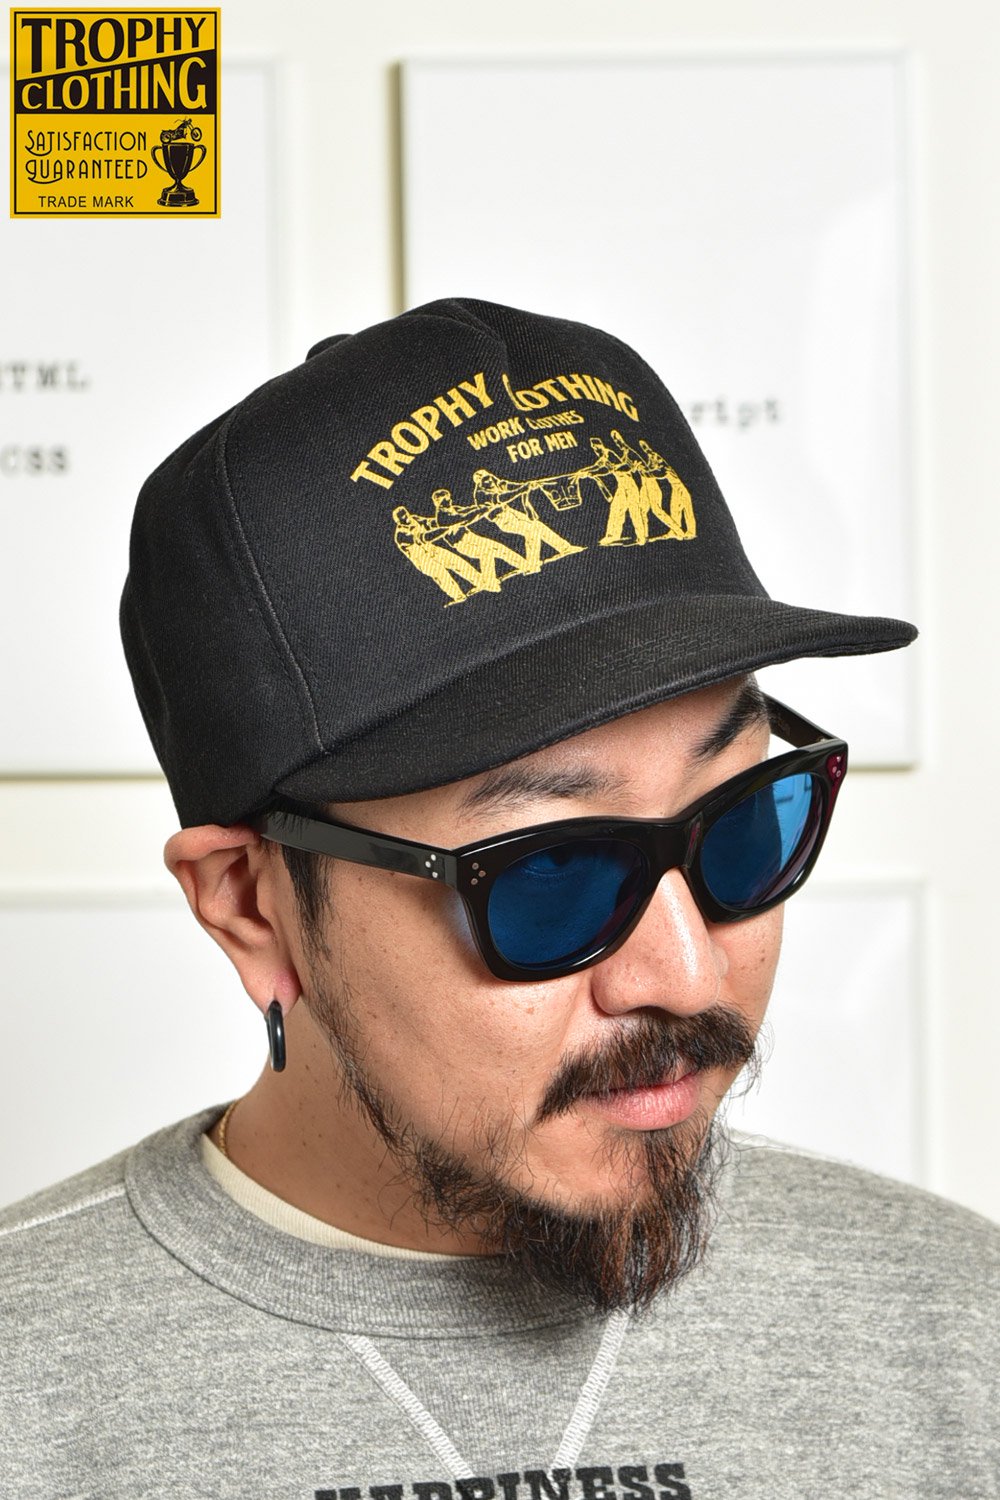 TROPHY CLOTHING(トロフィークロージング) トラッカーキャップ WORKERS LOGO TRACKER CAP TR20AW-708  通販正規取扱 | ハーレムストア公式通販サイト